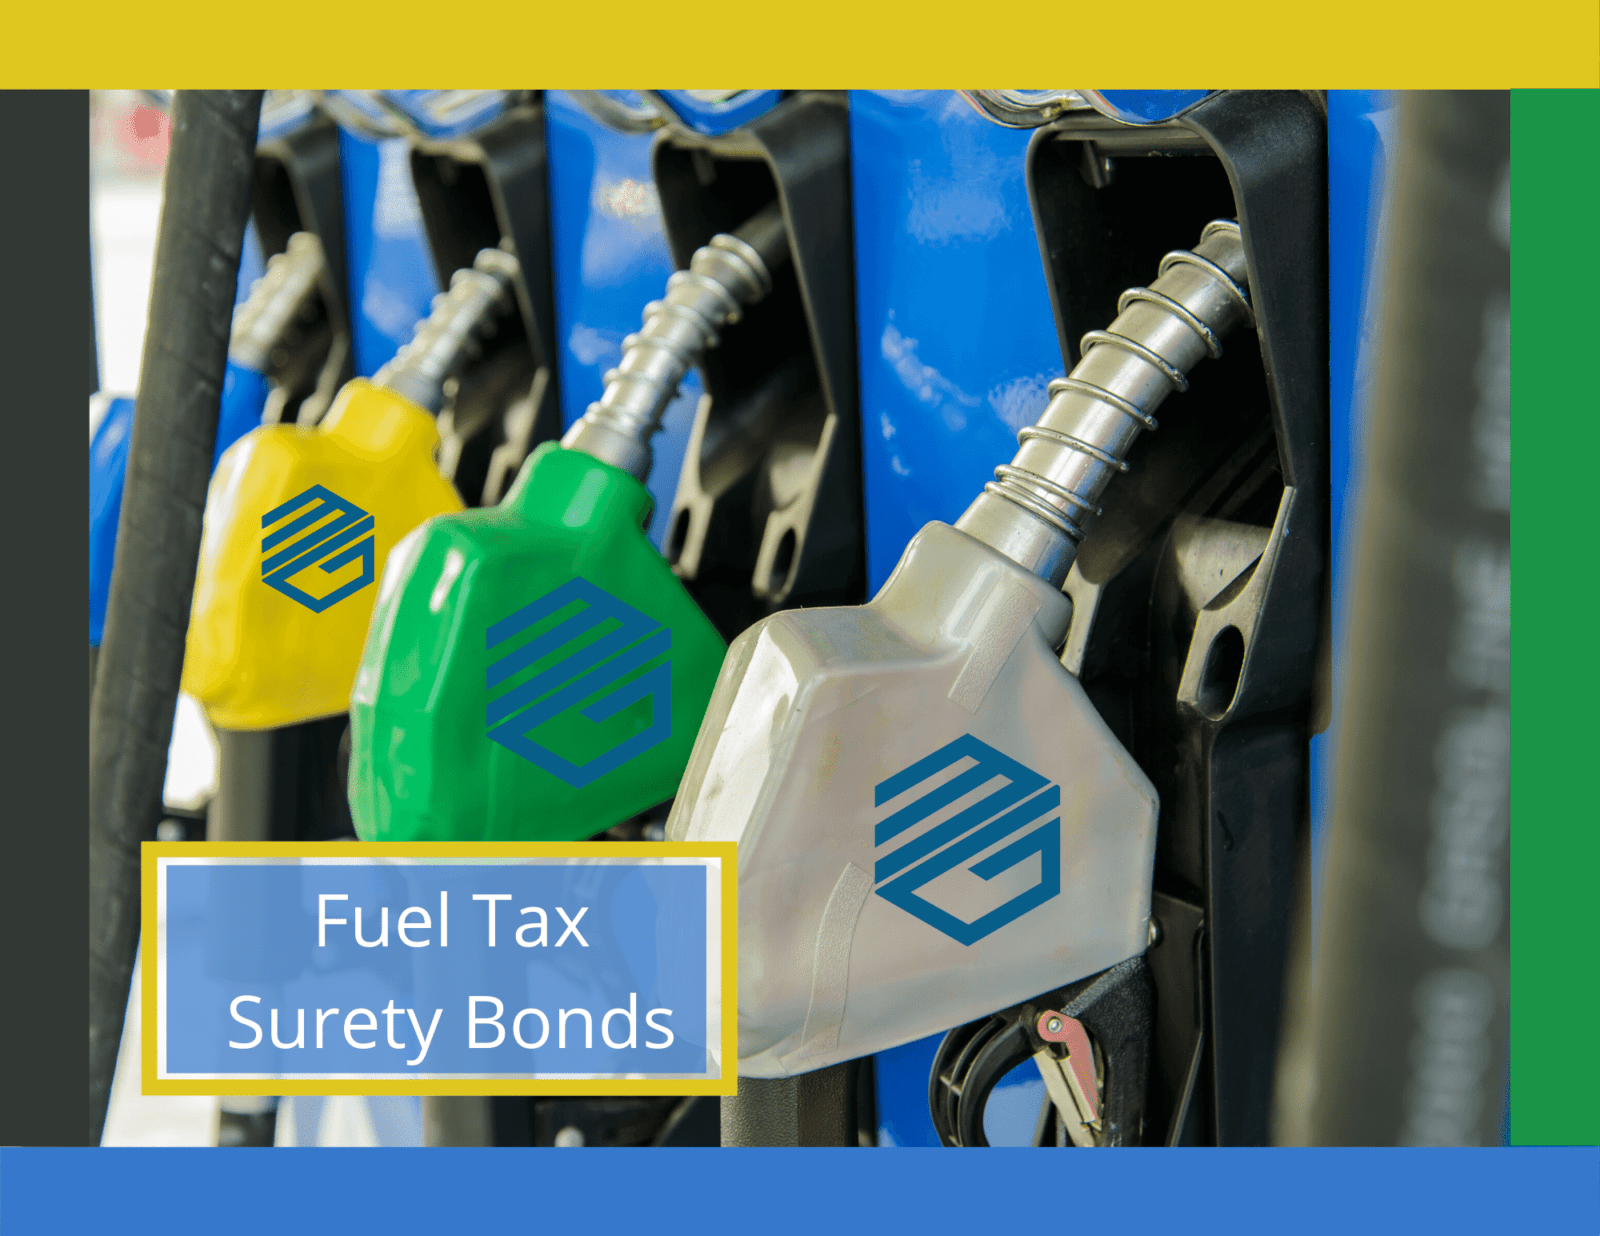 fuel tax bonds - Gas pumps with a colorful blue, green, gray and yellow border. The words, "fuel tax surety bonds" in a blue box surrounded by a yellow border